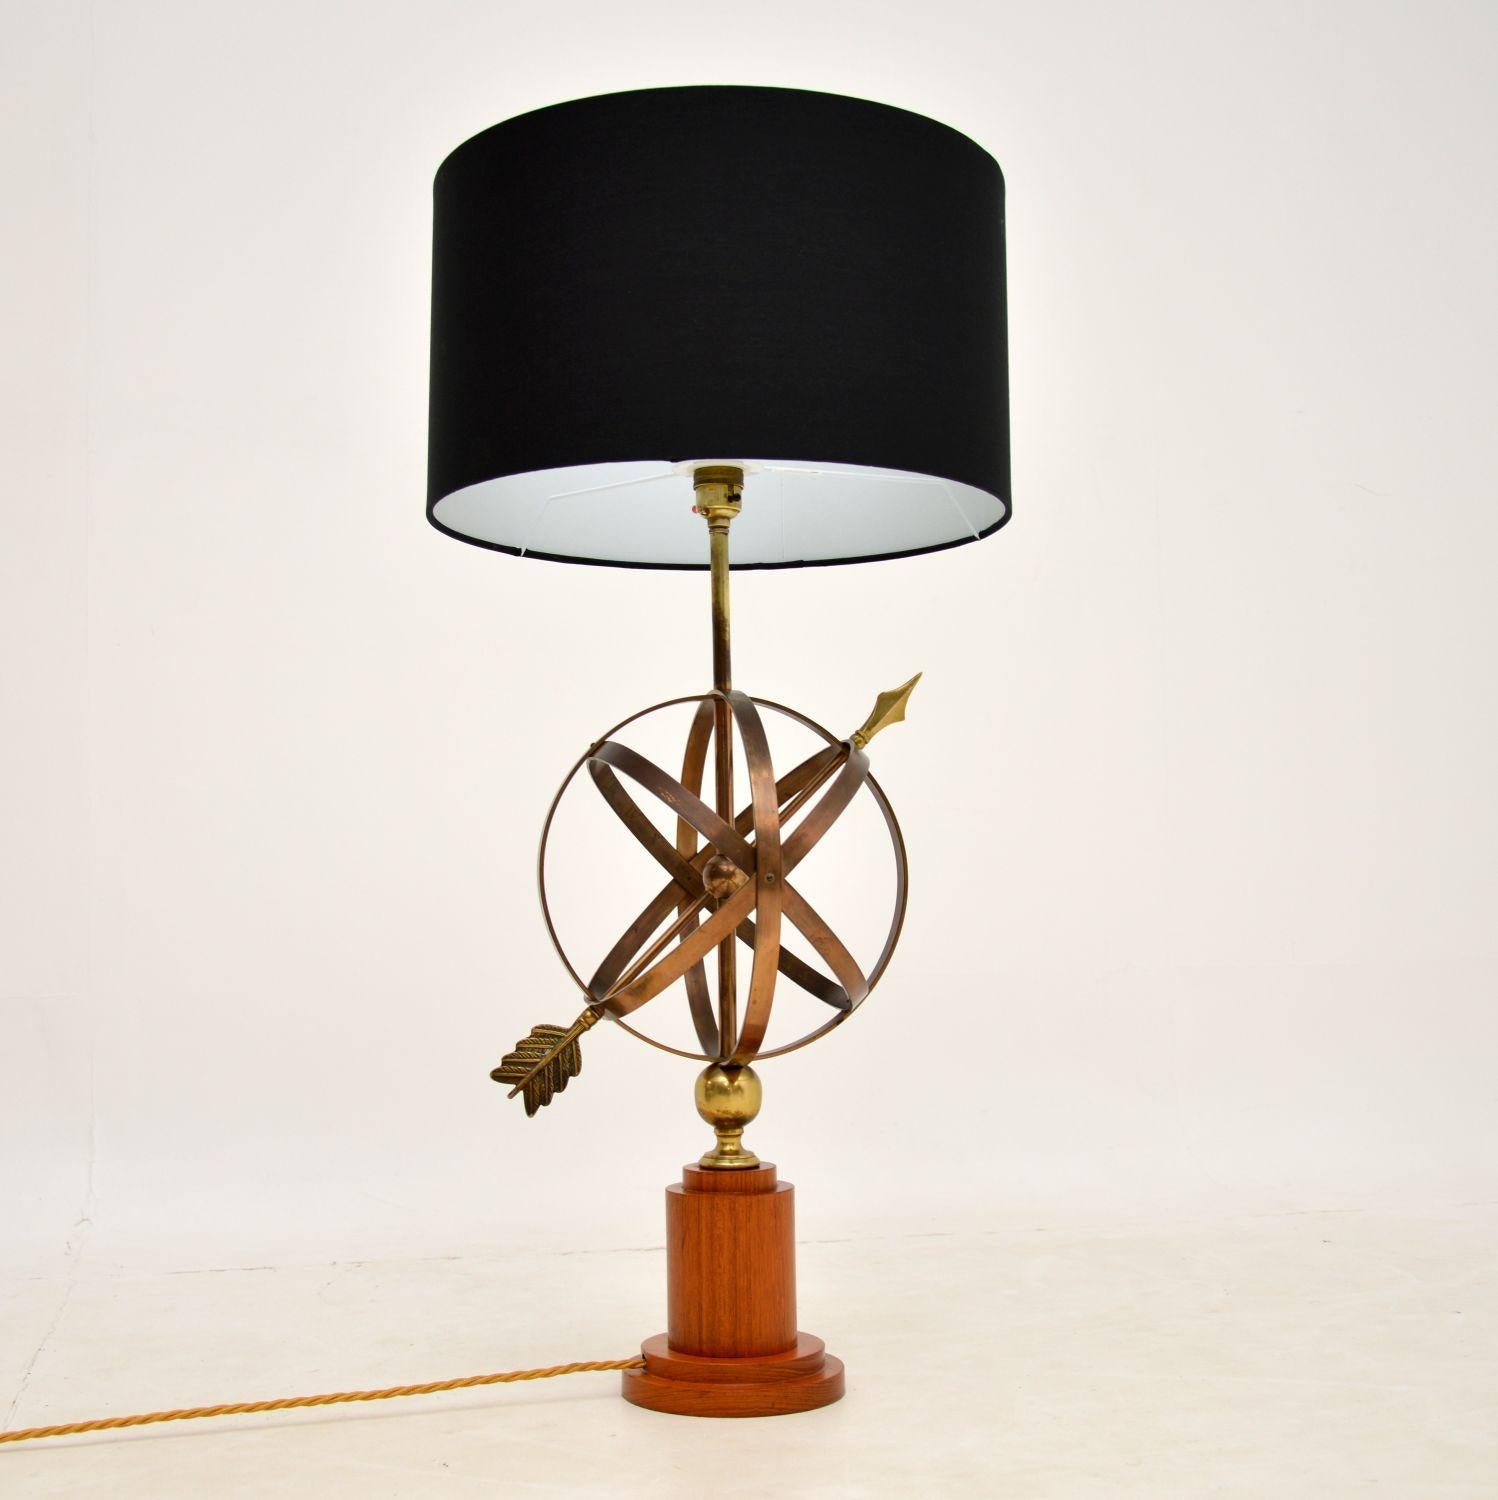 A stunning vintage brass armillary sphere table lamp, mounted on a solid teak base. This was made in England, it dates from the 1950-60’s.

An armillary sphere is an old astronomical instrument and model of the celestial globe, constructed from